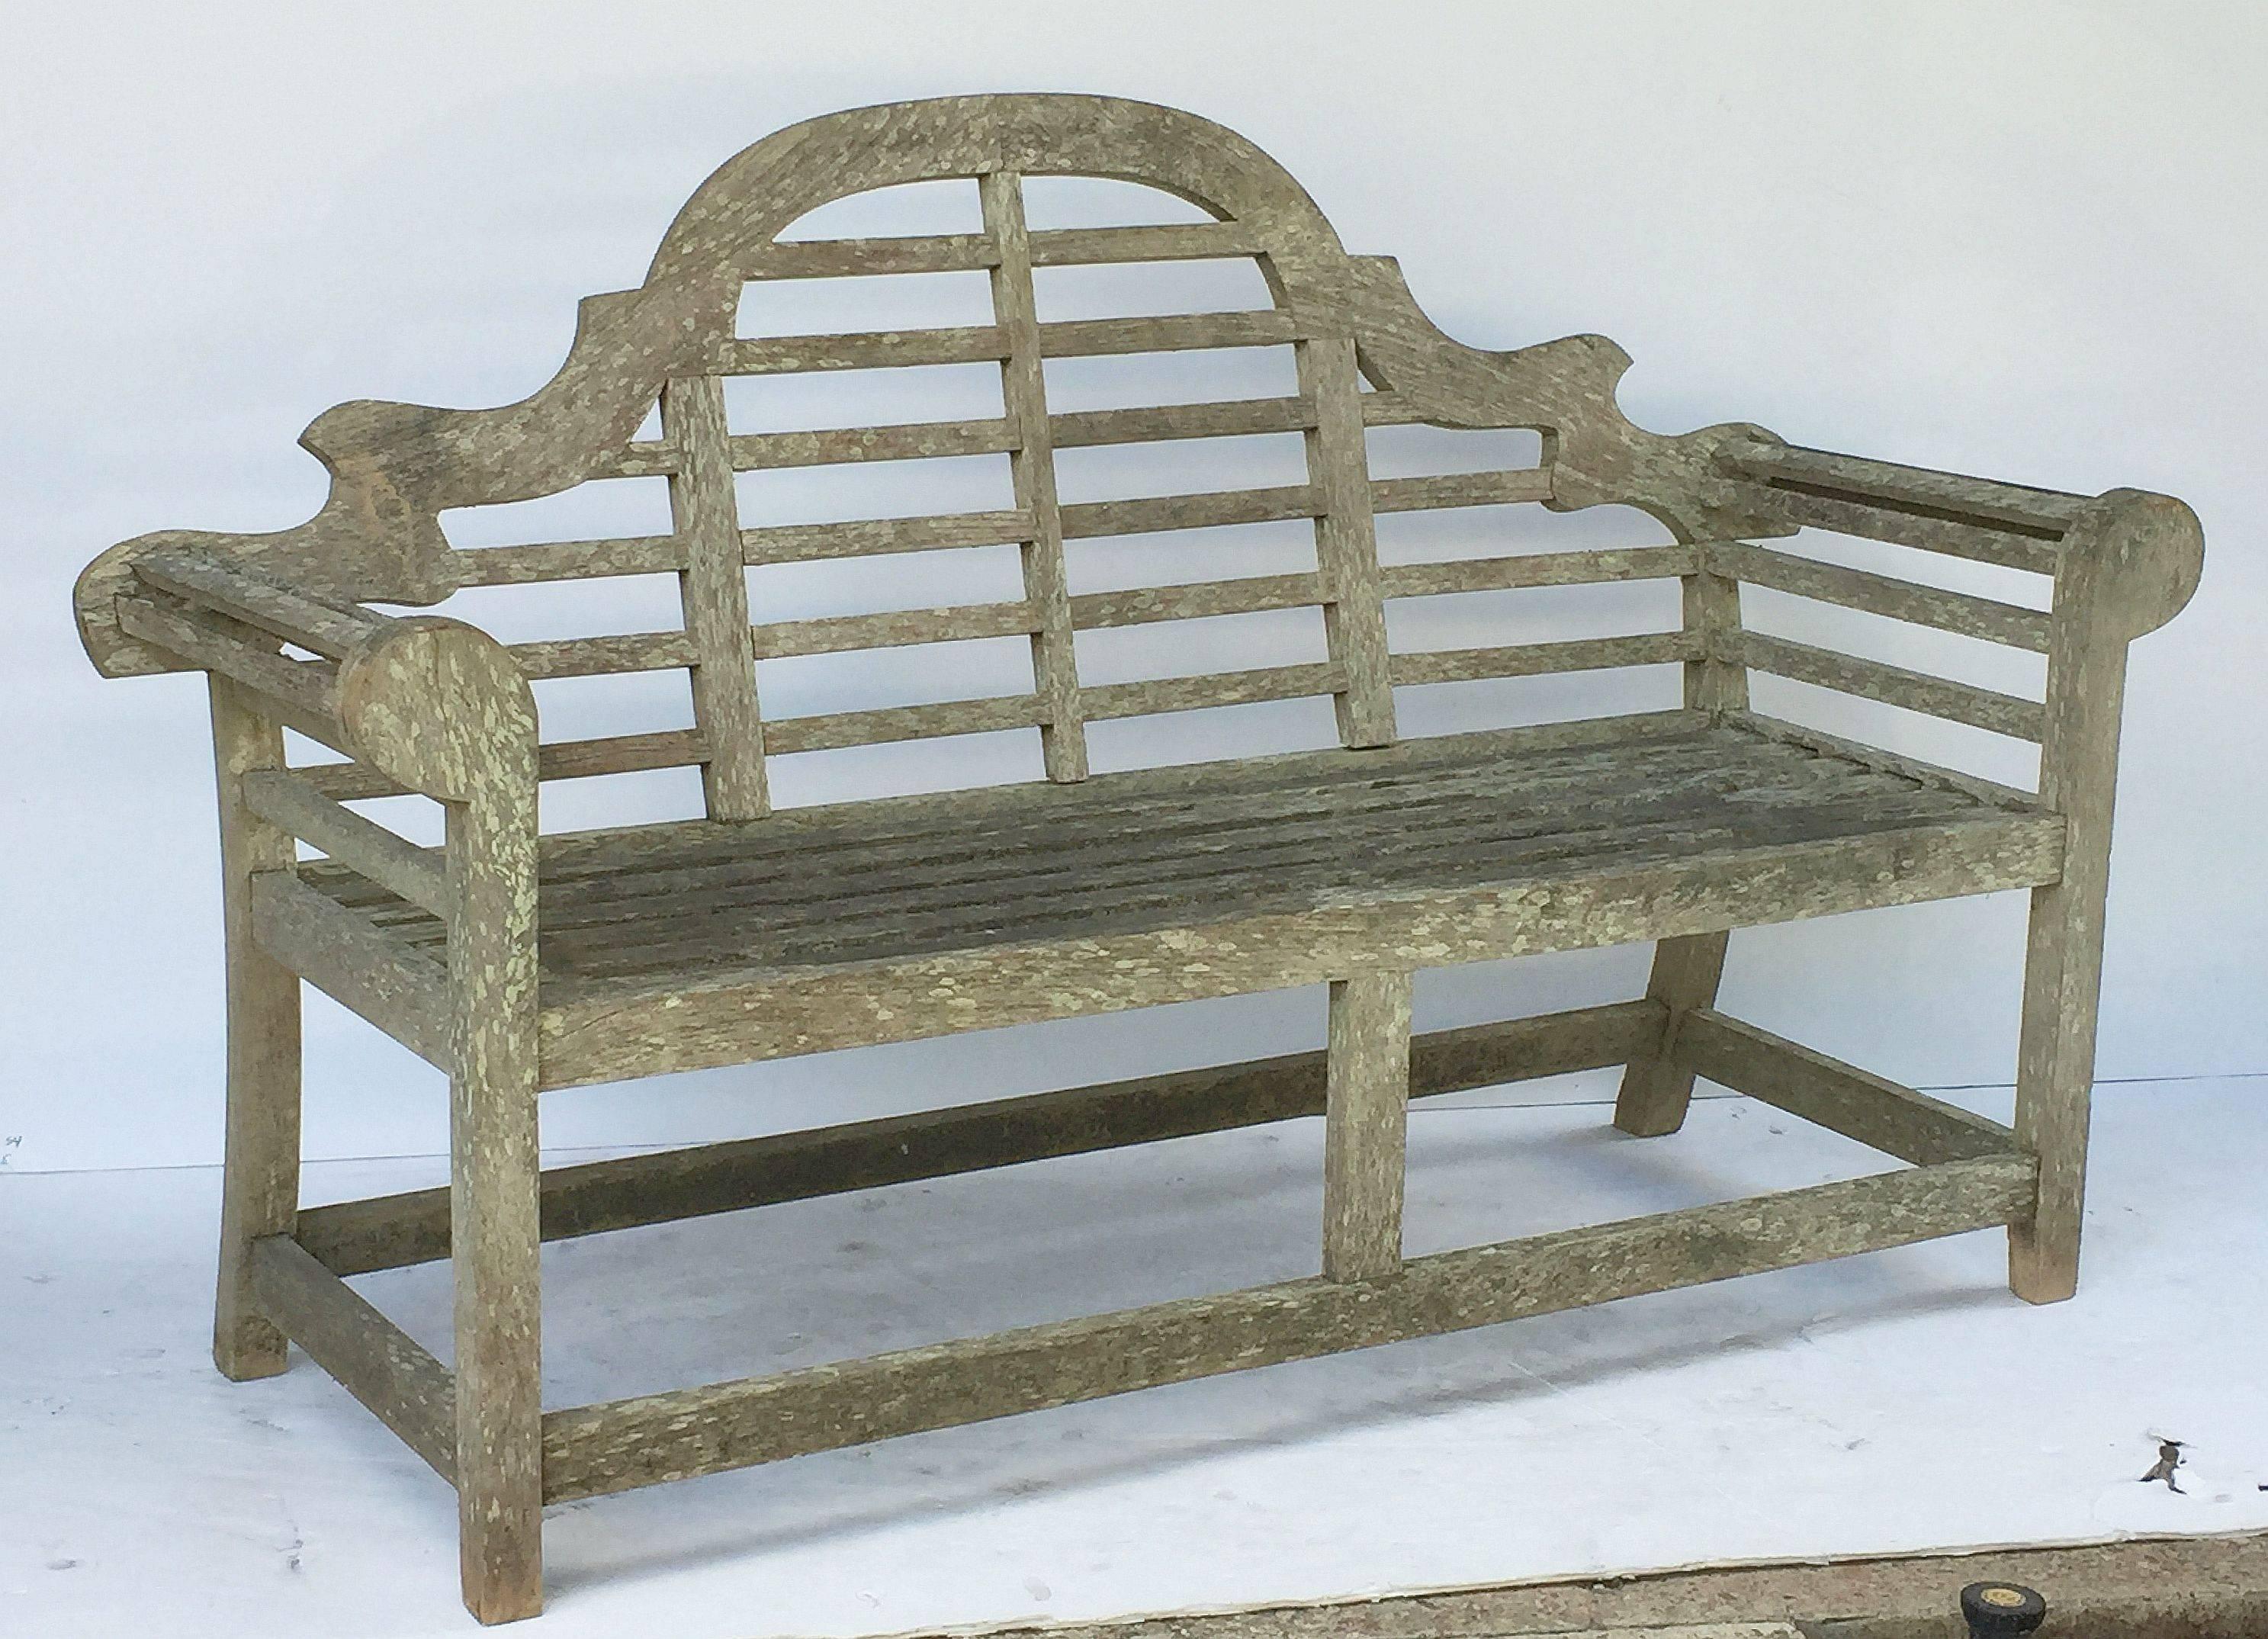 A vintage Lutyens style teak English garden bench after Sir Edwin Lutyens, the British architect renowned for his imaginative, Classic designs throughout England, Ireland and New Delhi (India).

Featuring a high-arched back for comfort and